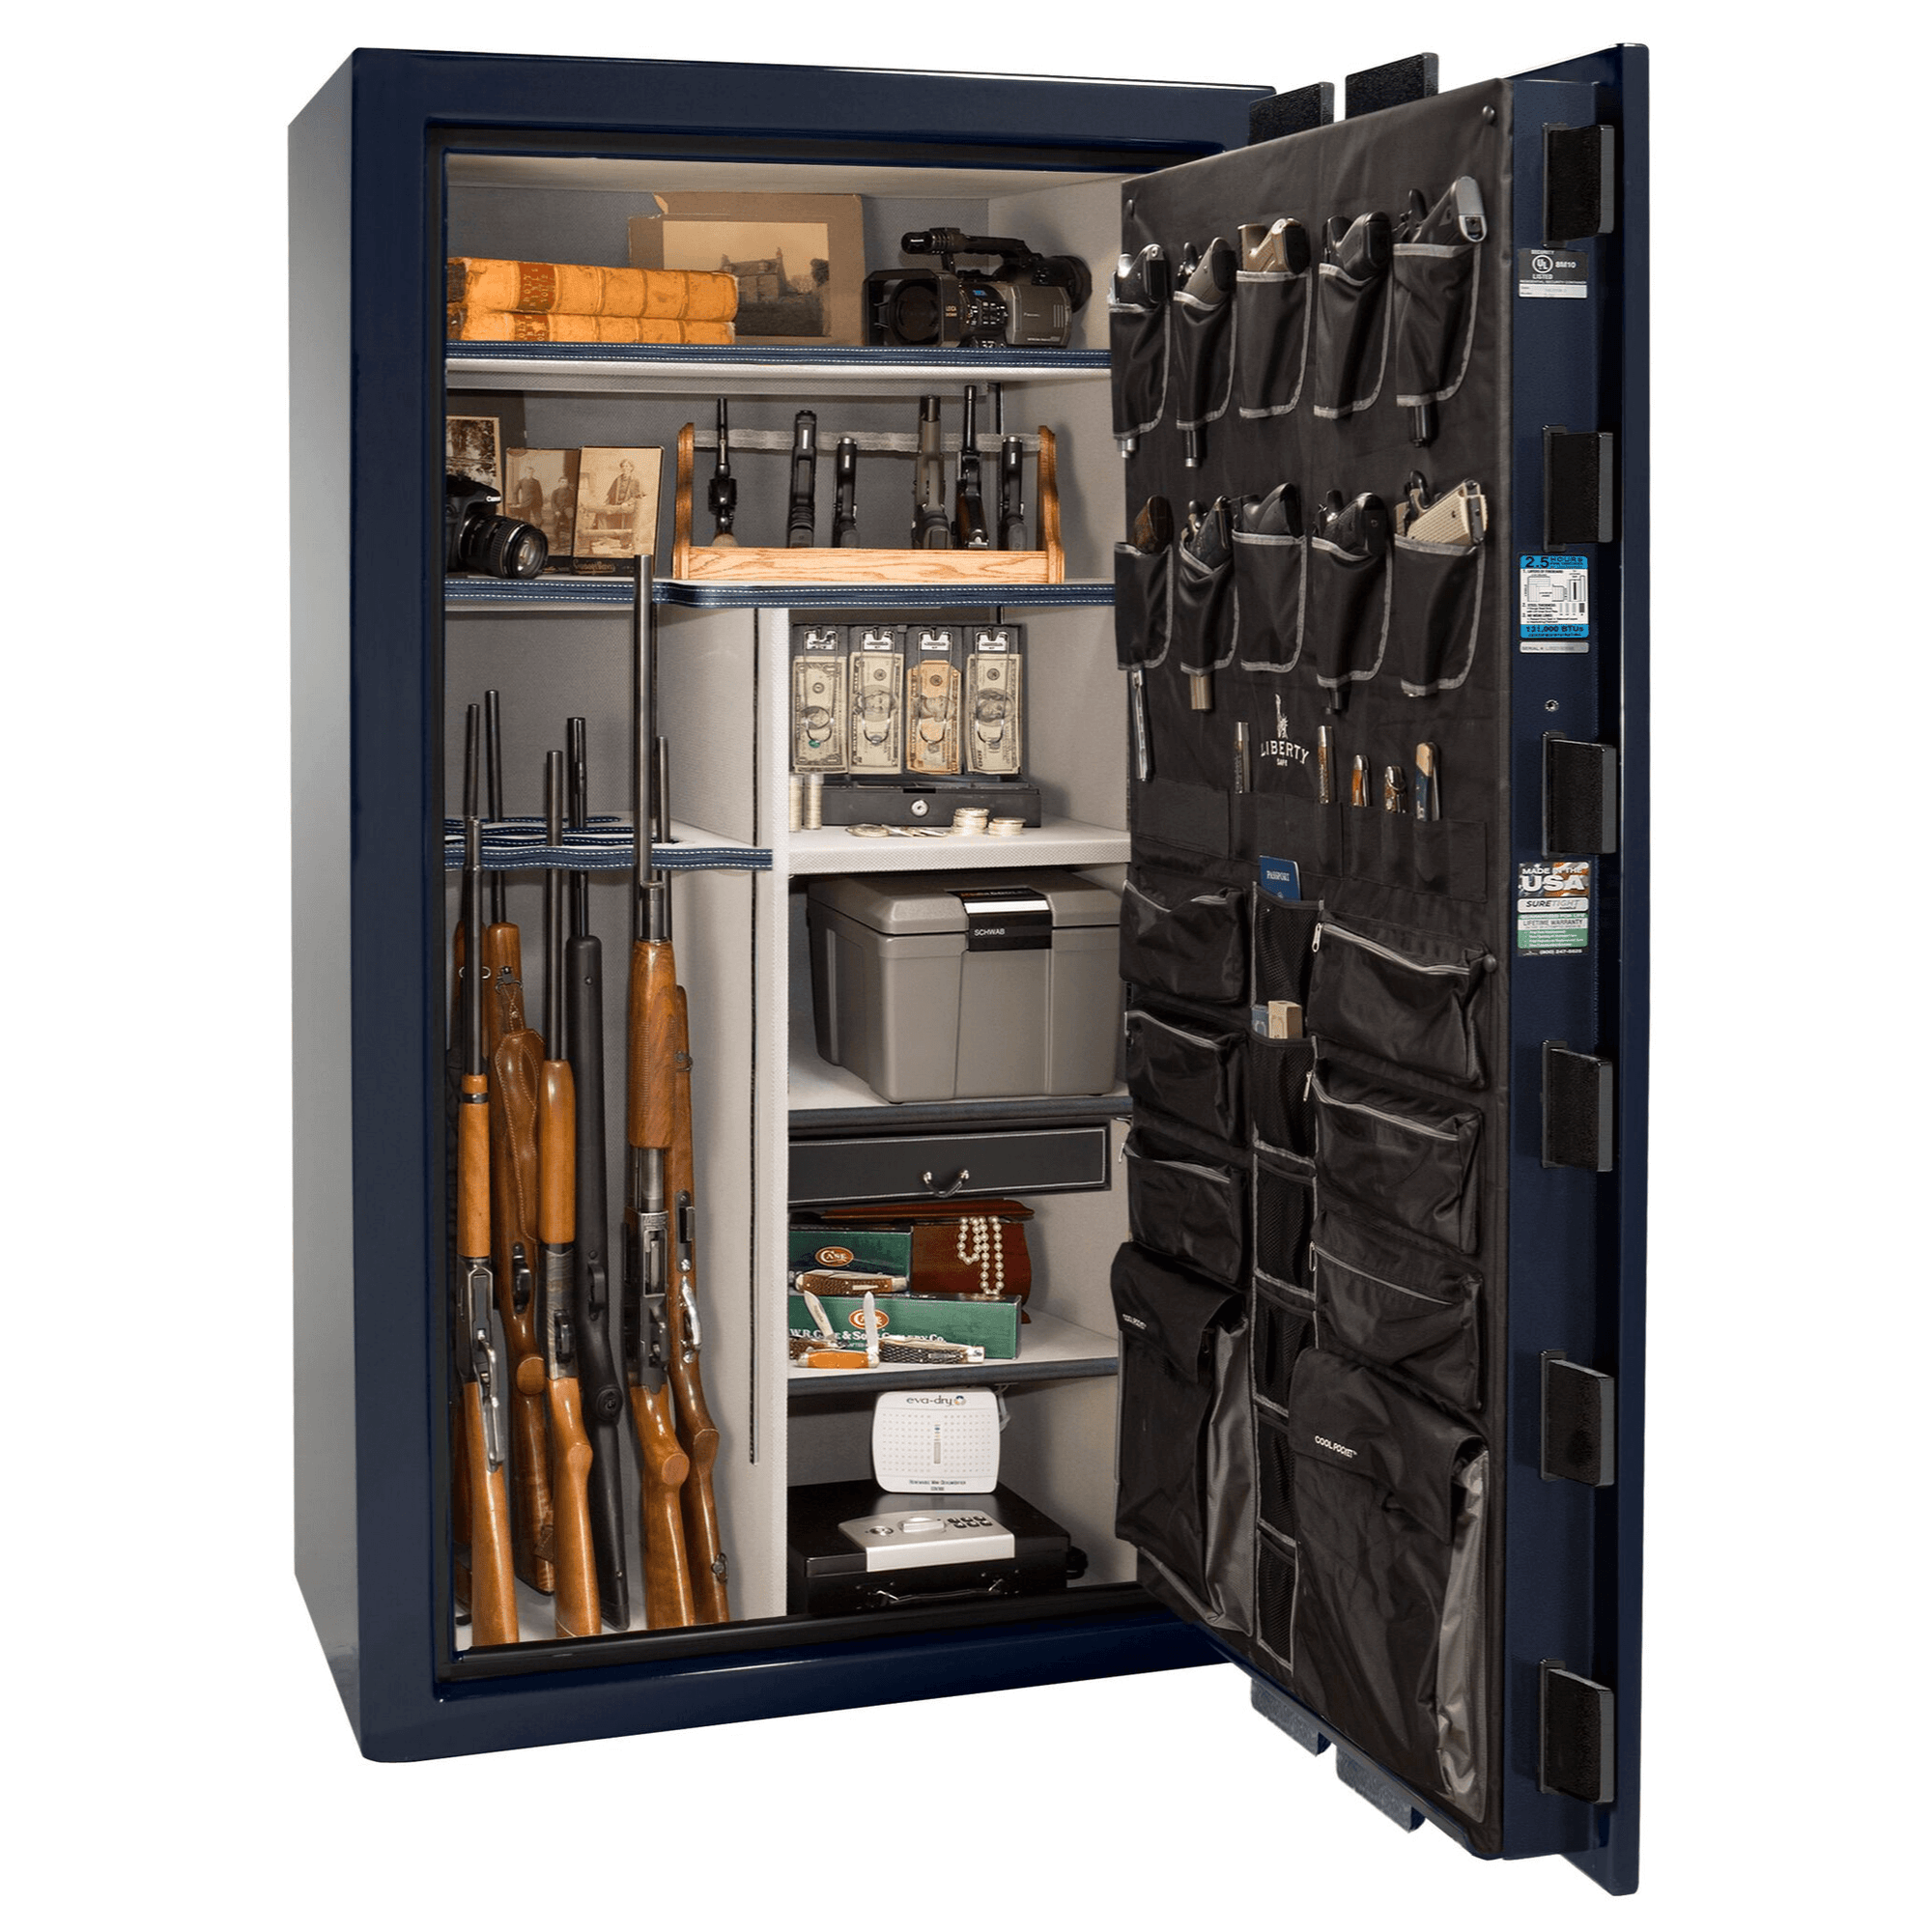 Magnum | 50 | Level 8 Security | 150 Minute Fire Protection | Blue Gloss | Chrome Electronic Lock | 72.5"(H) x 42"(W) x 32"(D)